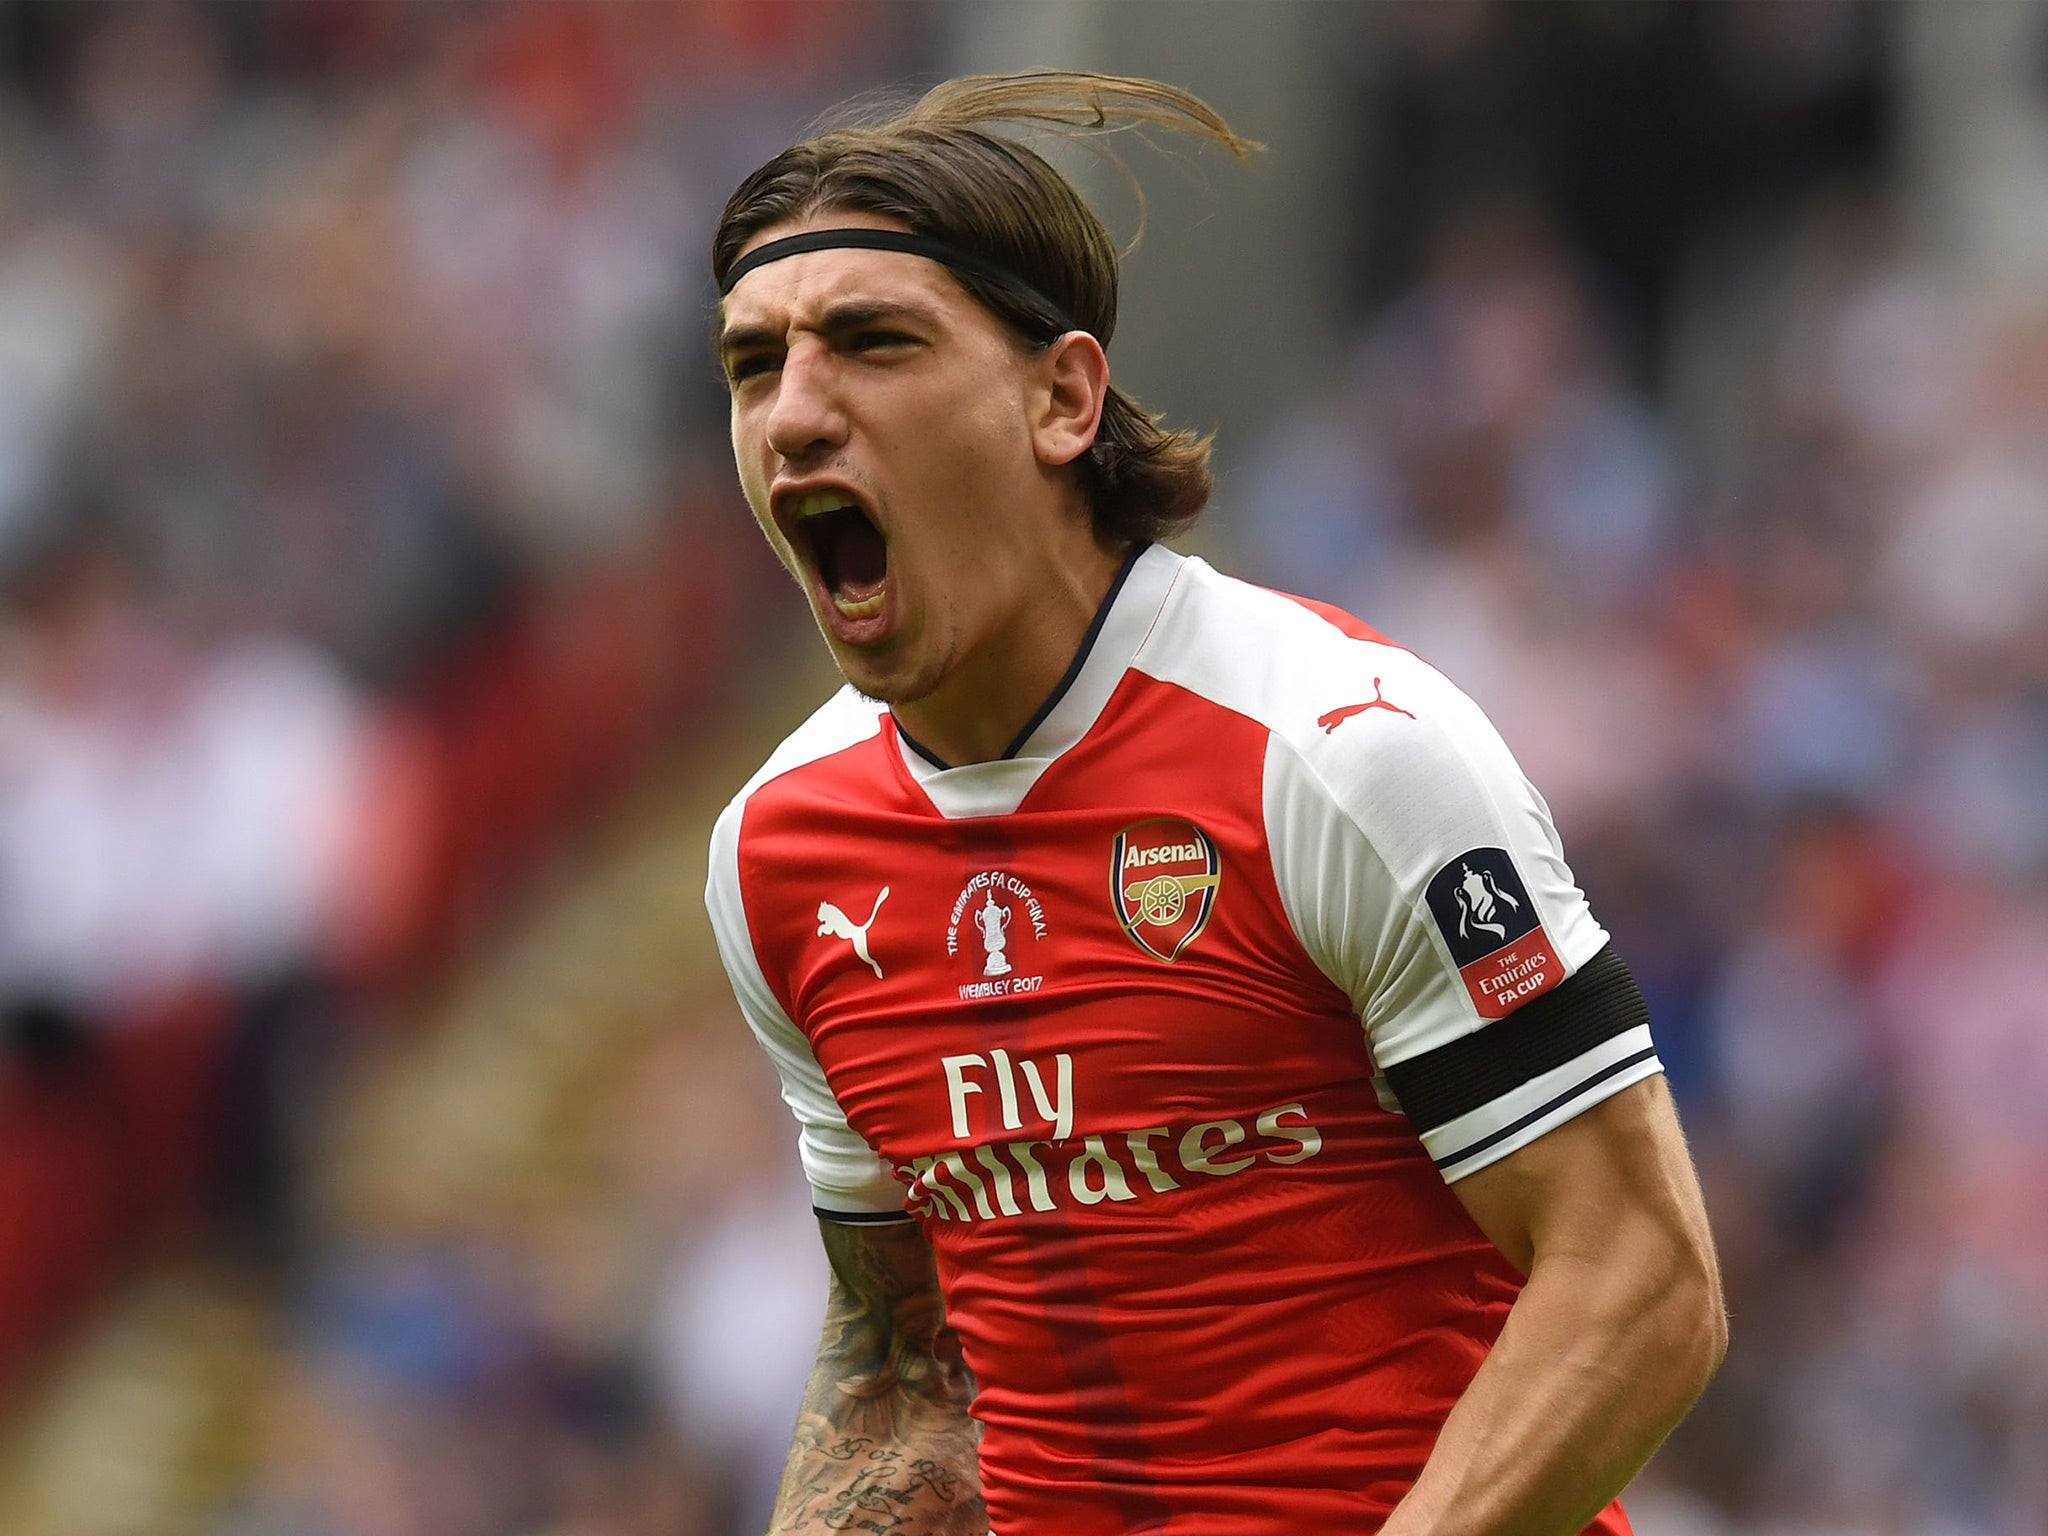 Hector Bellerin is one of Barcelona's top targets but looks set to stay